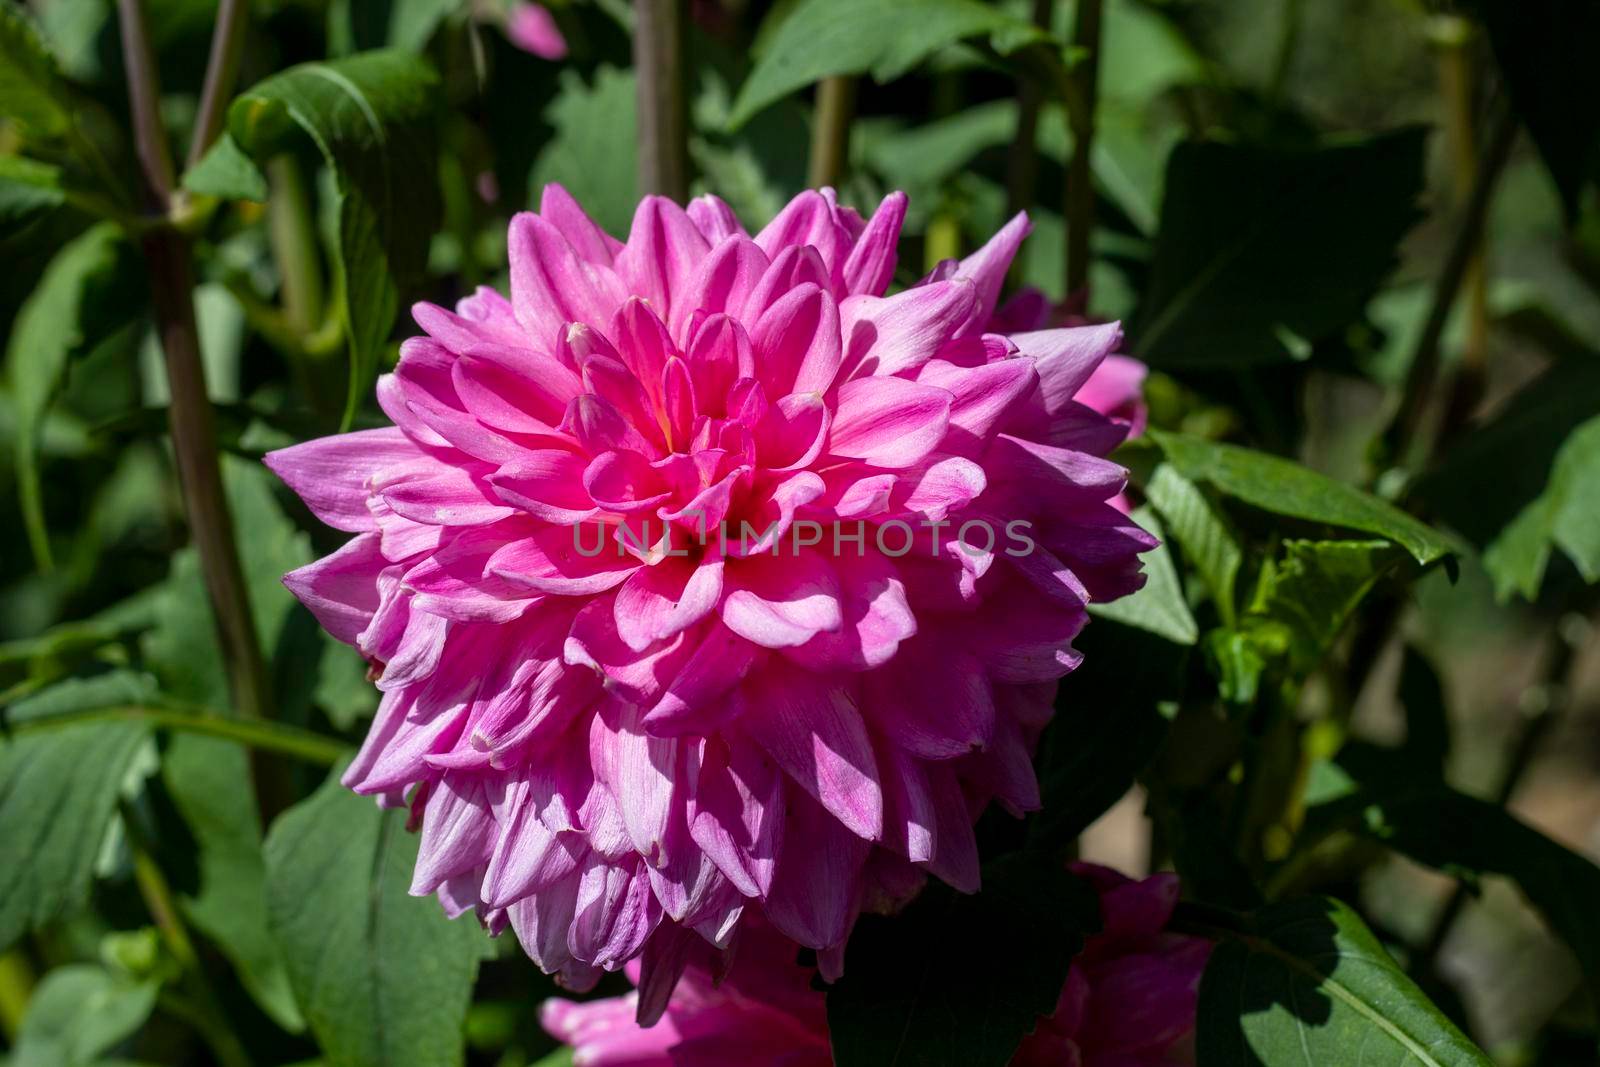 A beautiful pink Dalia flower by bybyphotography